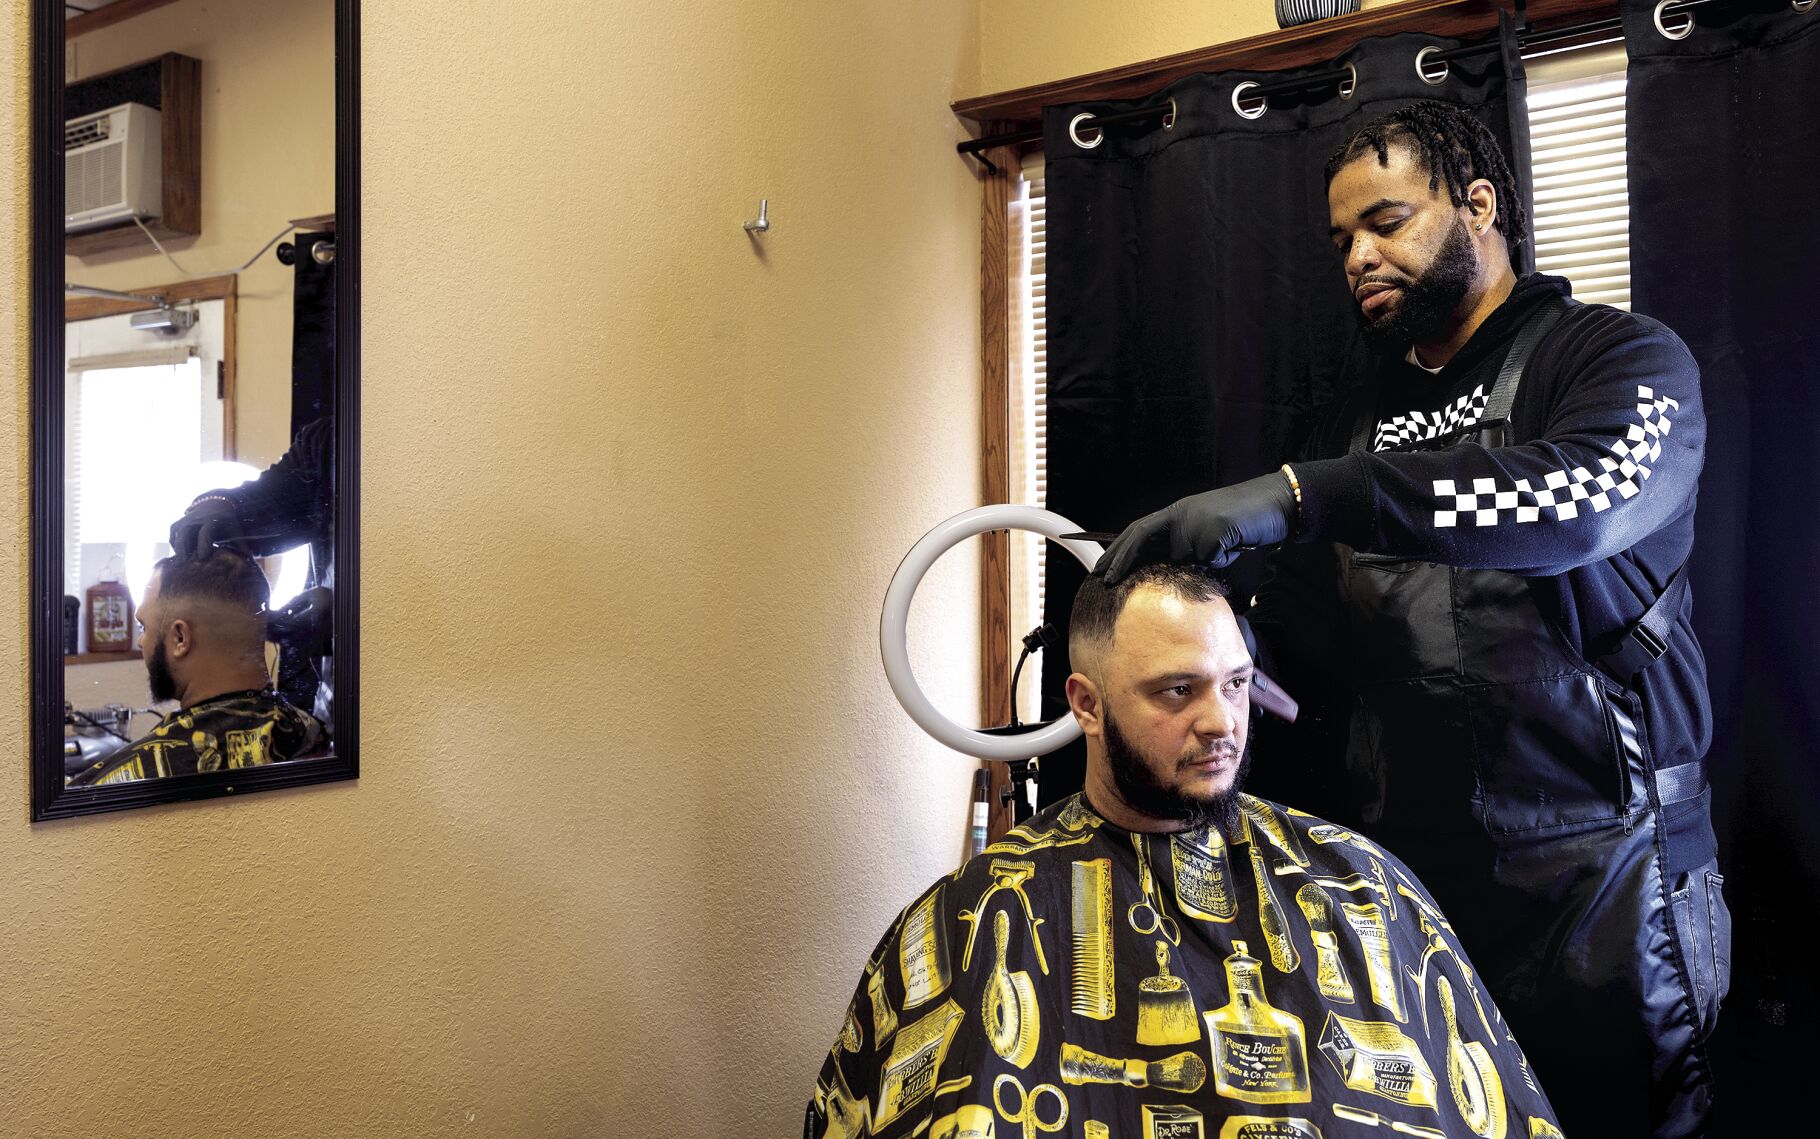 Tight Fade Barbershop owner Derrick Clark cuts the hair of Yunel Henriquez, of East Dubuque, Ill., at his barbershop on White Street in Dubuque on Friday.    PHOTO CREDIT: Stephen Gassman